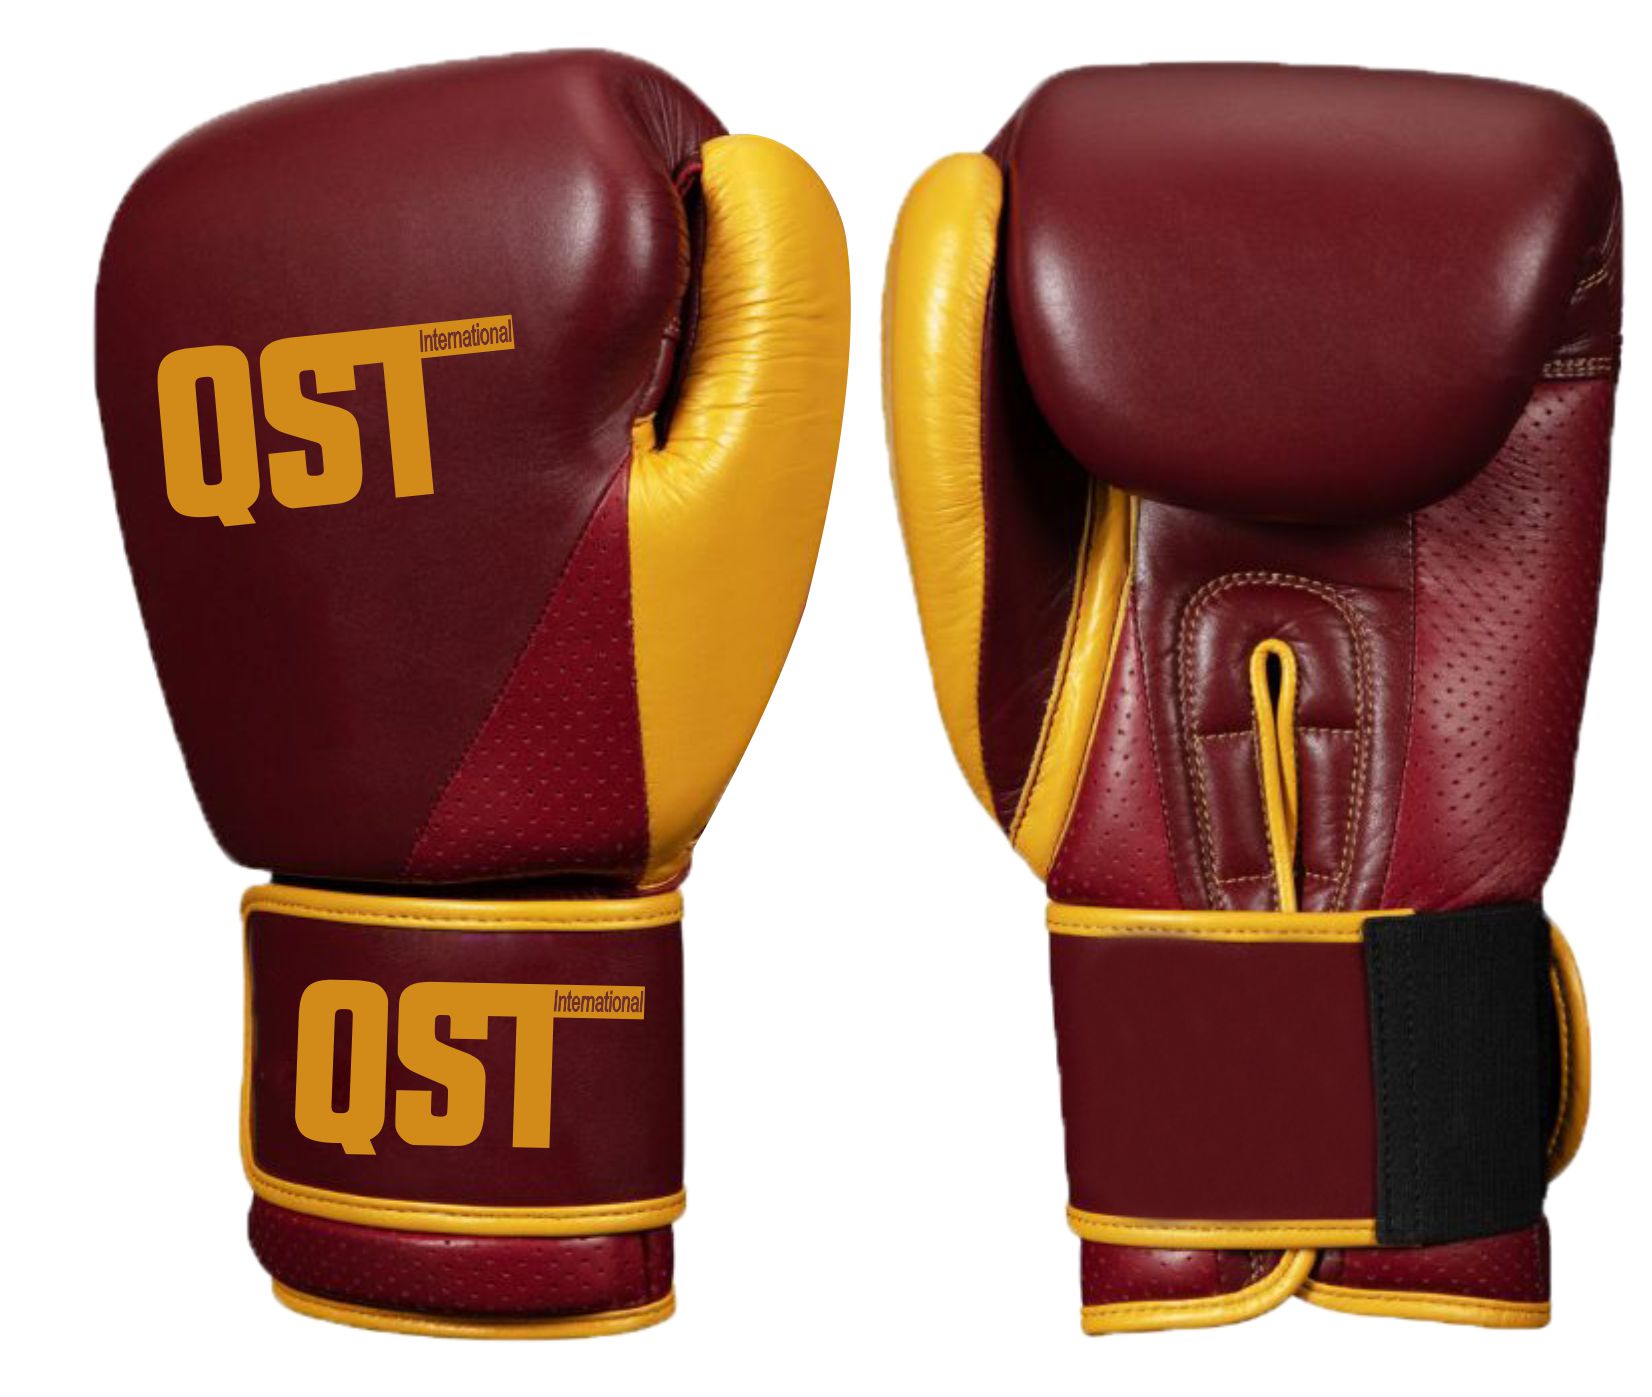 Professional Boxing Gloves - PRG-1510